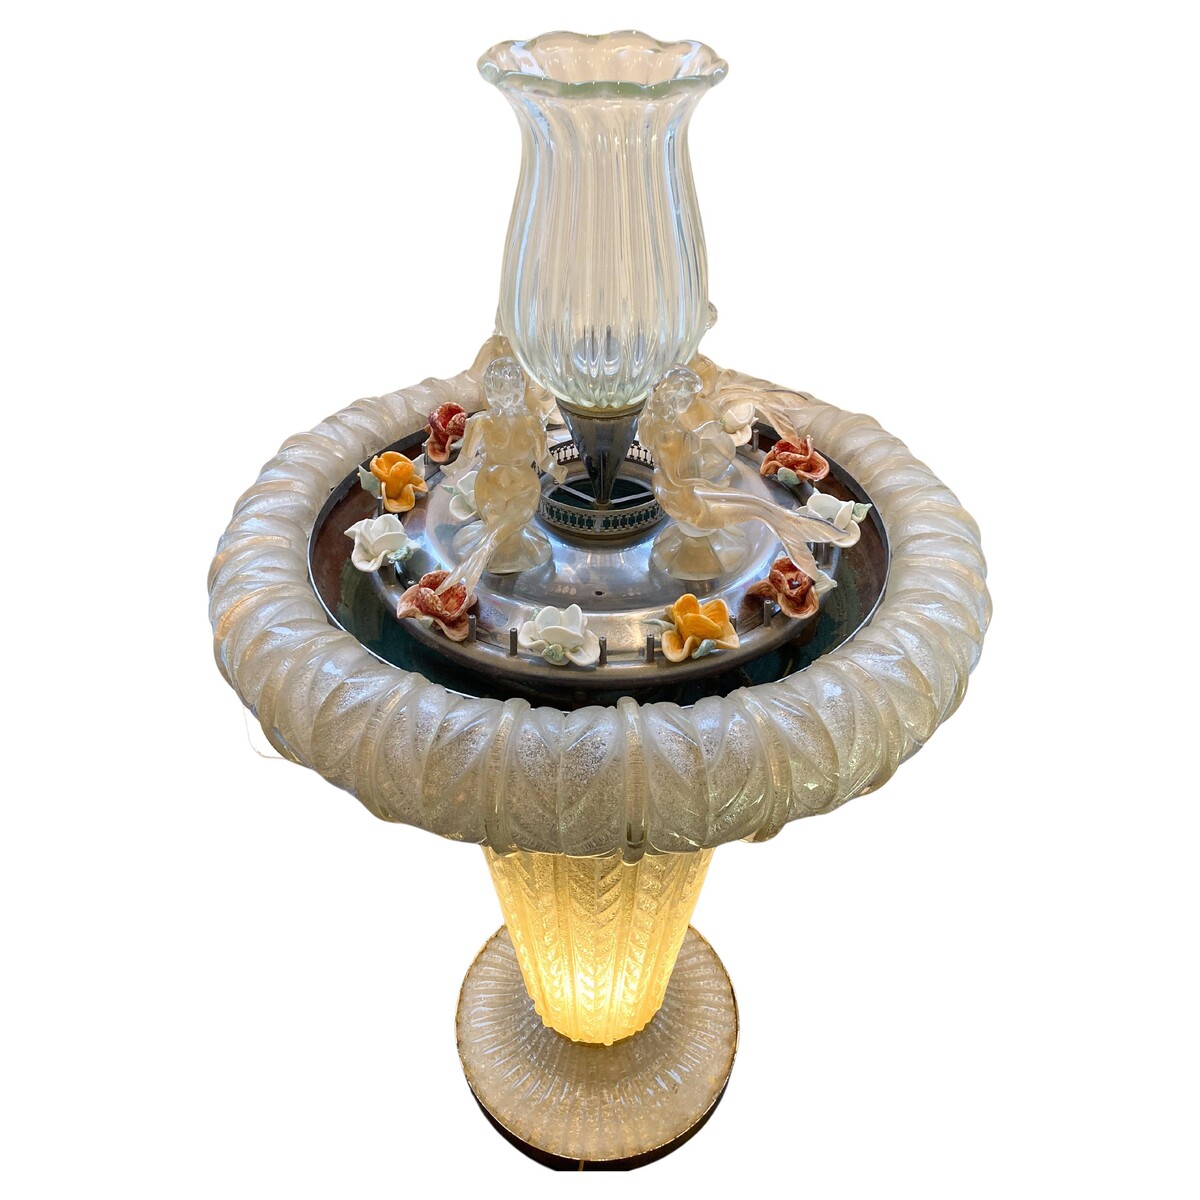 Mid-Century Modern Murano Glass Fountain with a Central Vase encircled by 4 Mermaids, 1950s